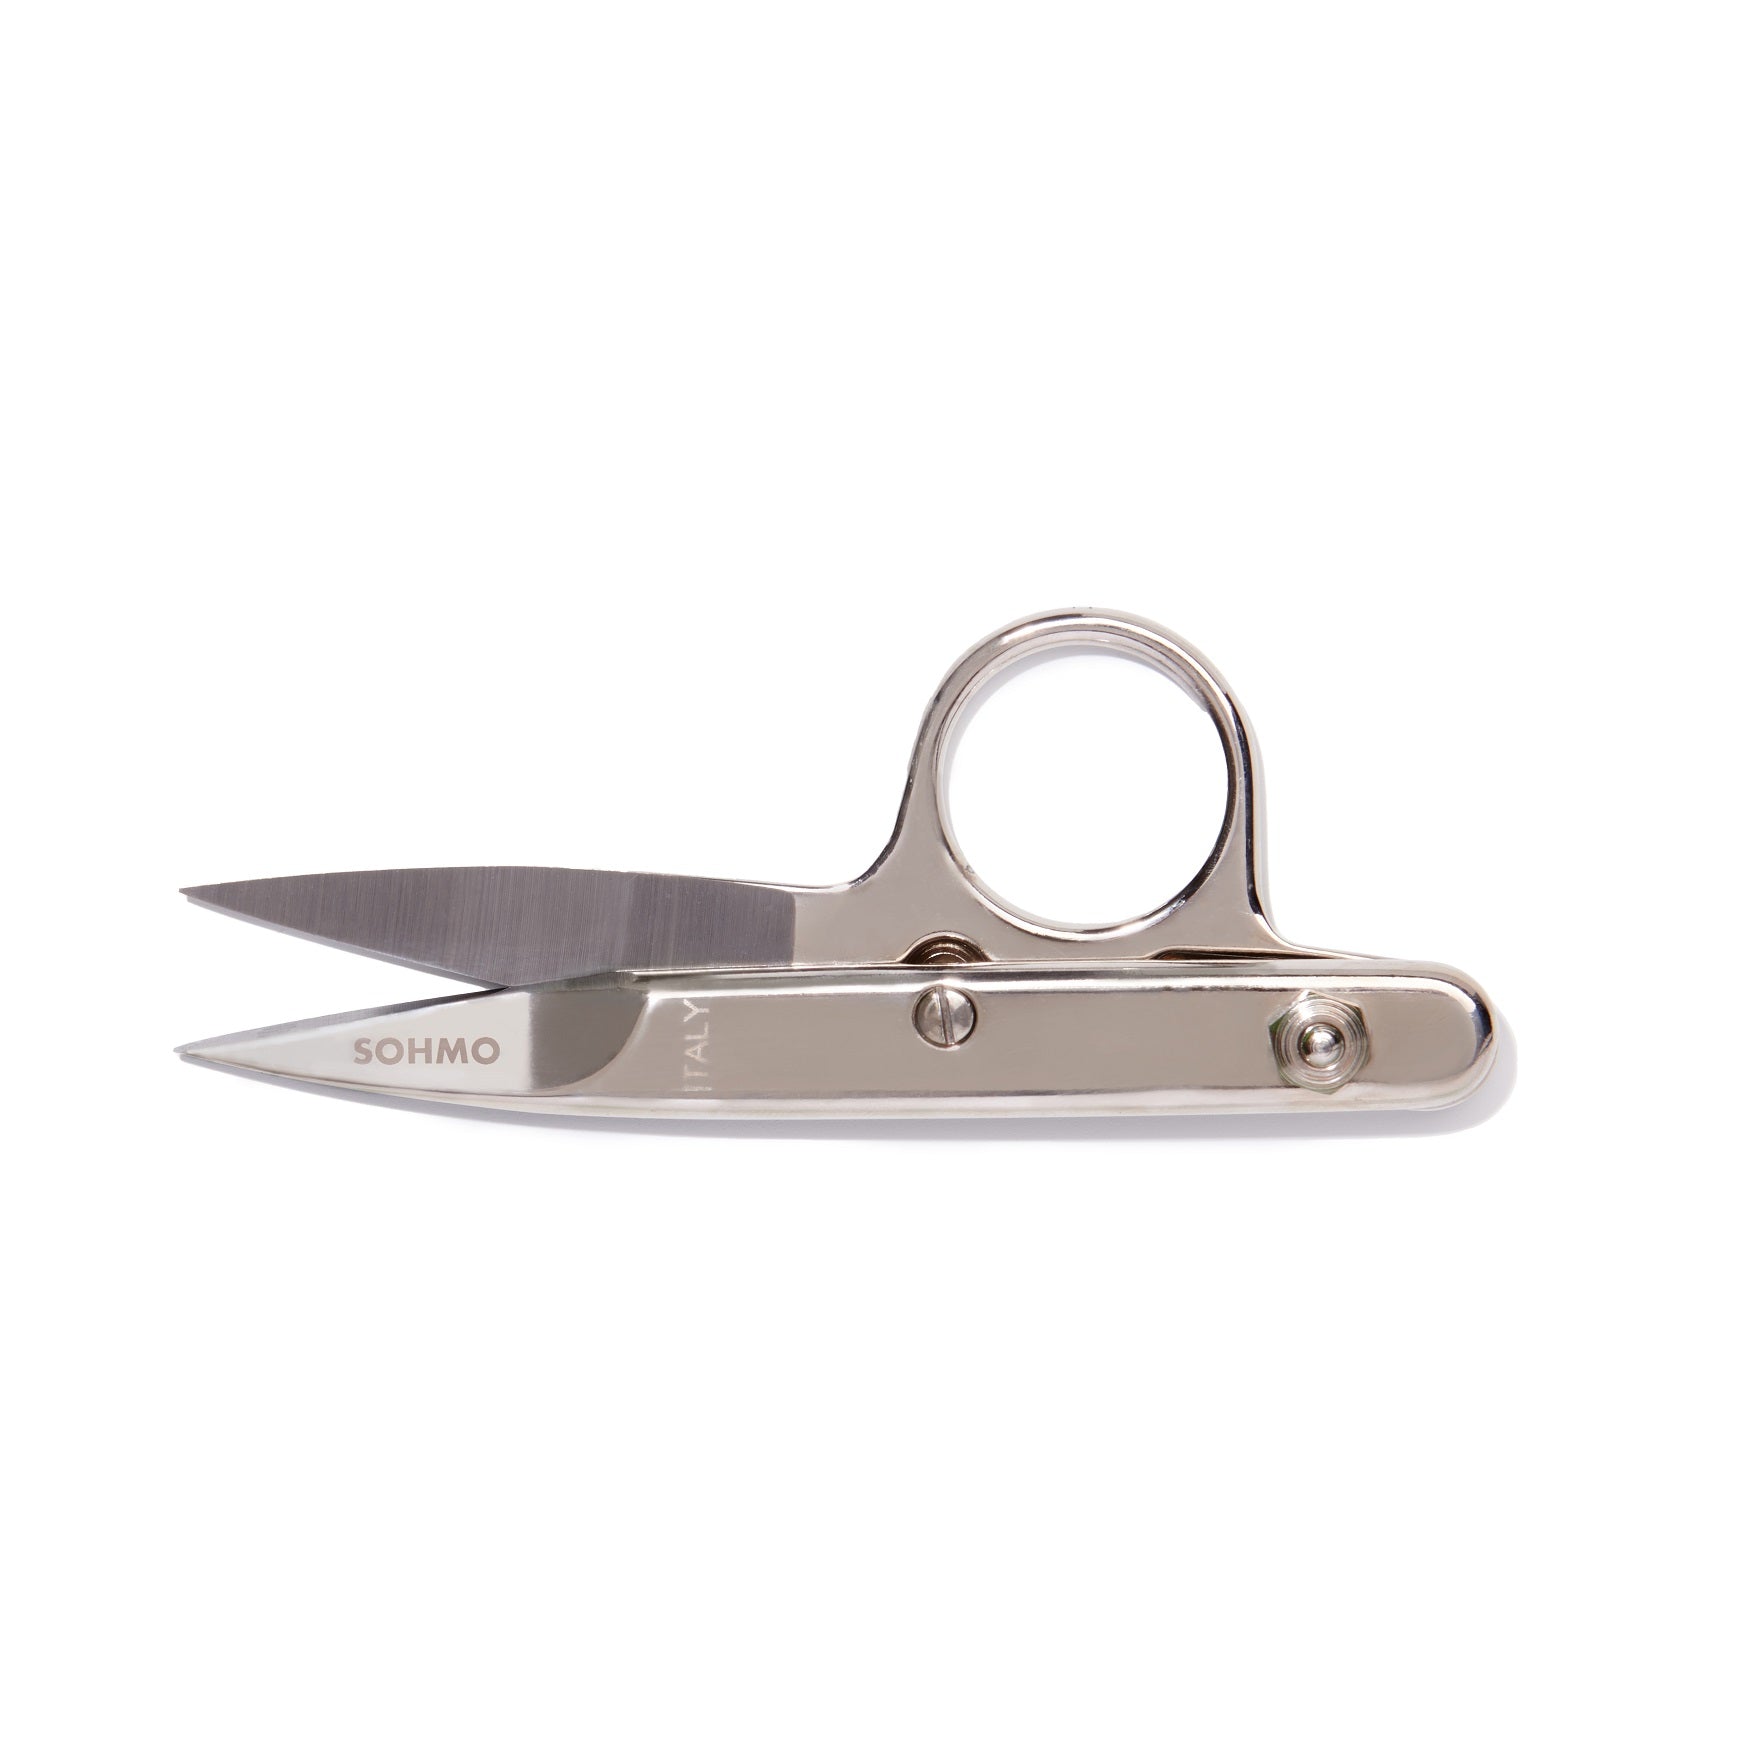 Nickle plated steel thread snips